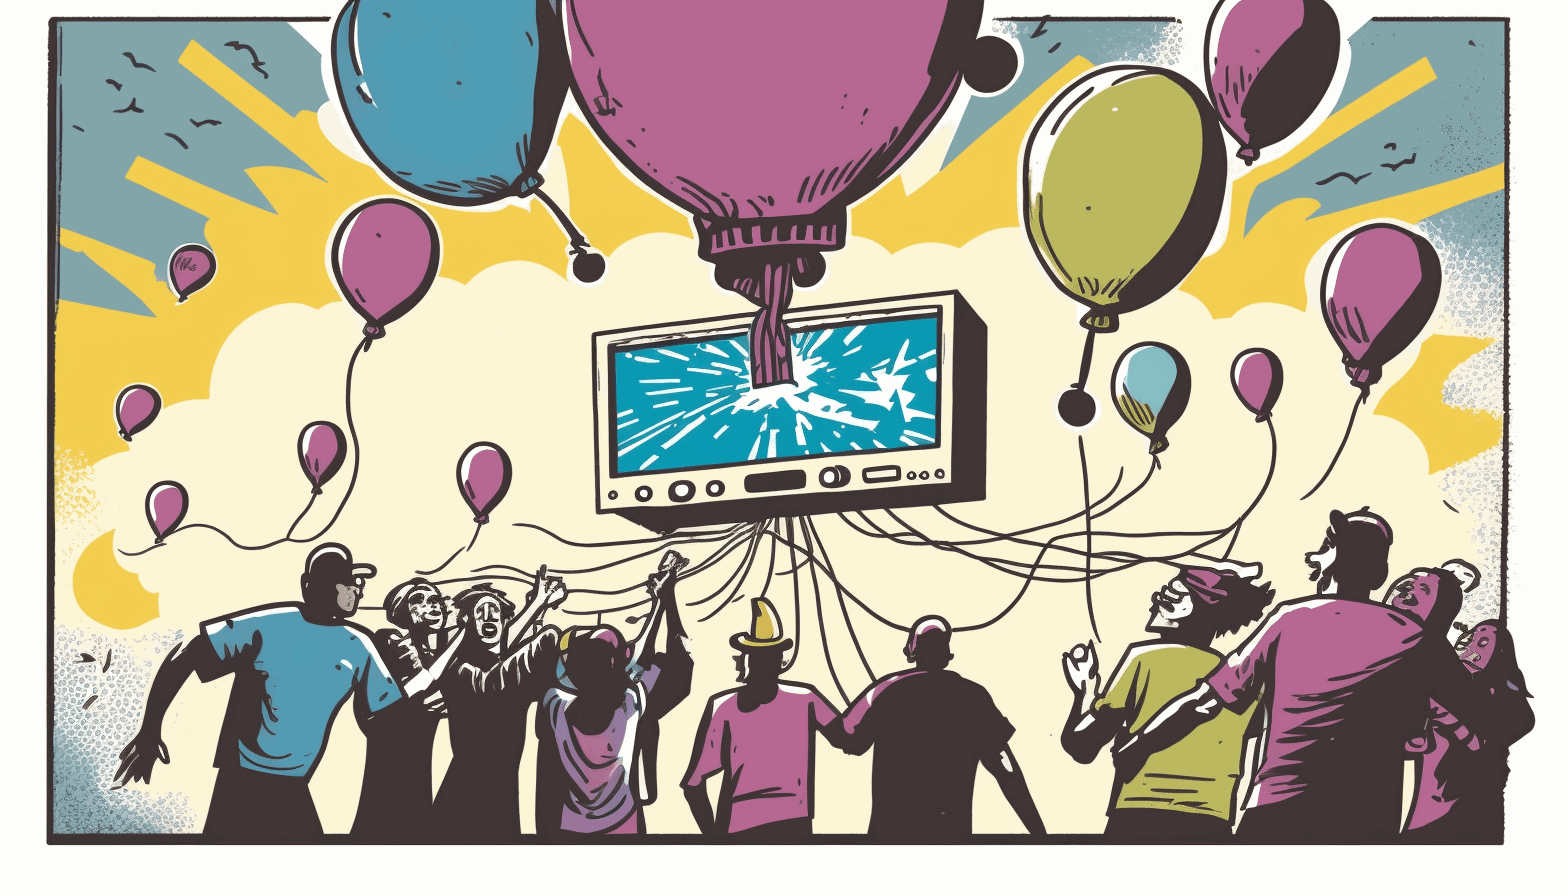 A cartoonish depiction of a group of individuals exploiting a helium balloon with an image of a LoRaWAN gateway and MiddleMan or Chirp Stack Packet Multiplexer in the background.